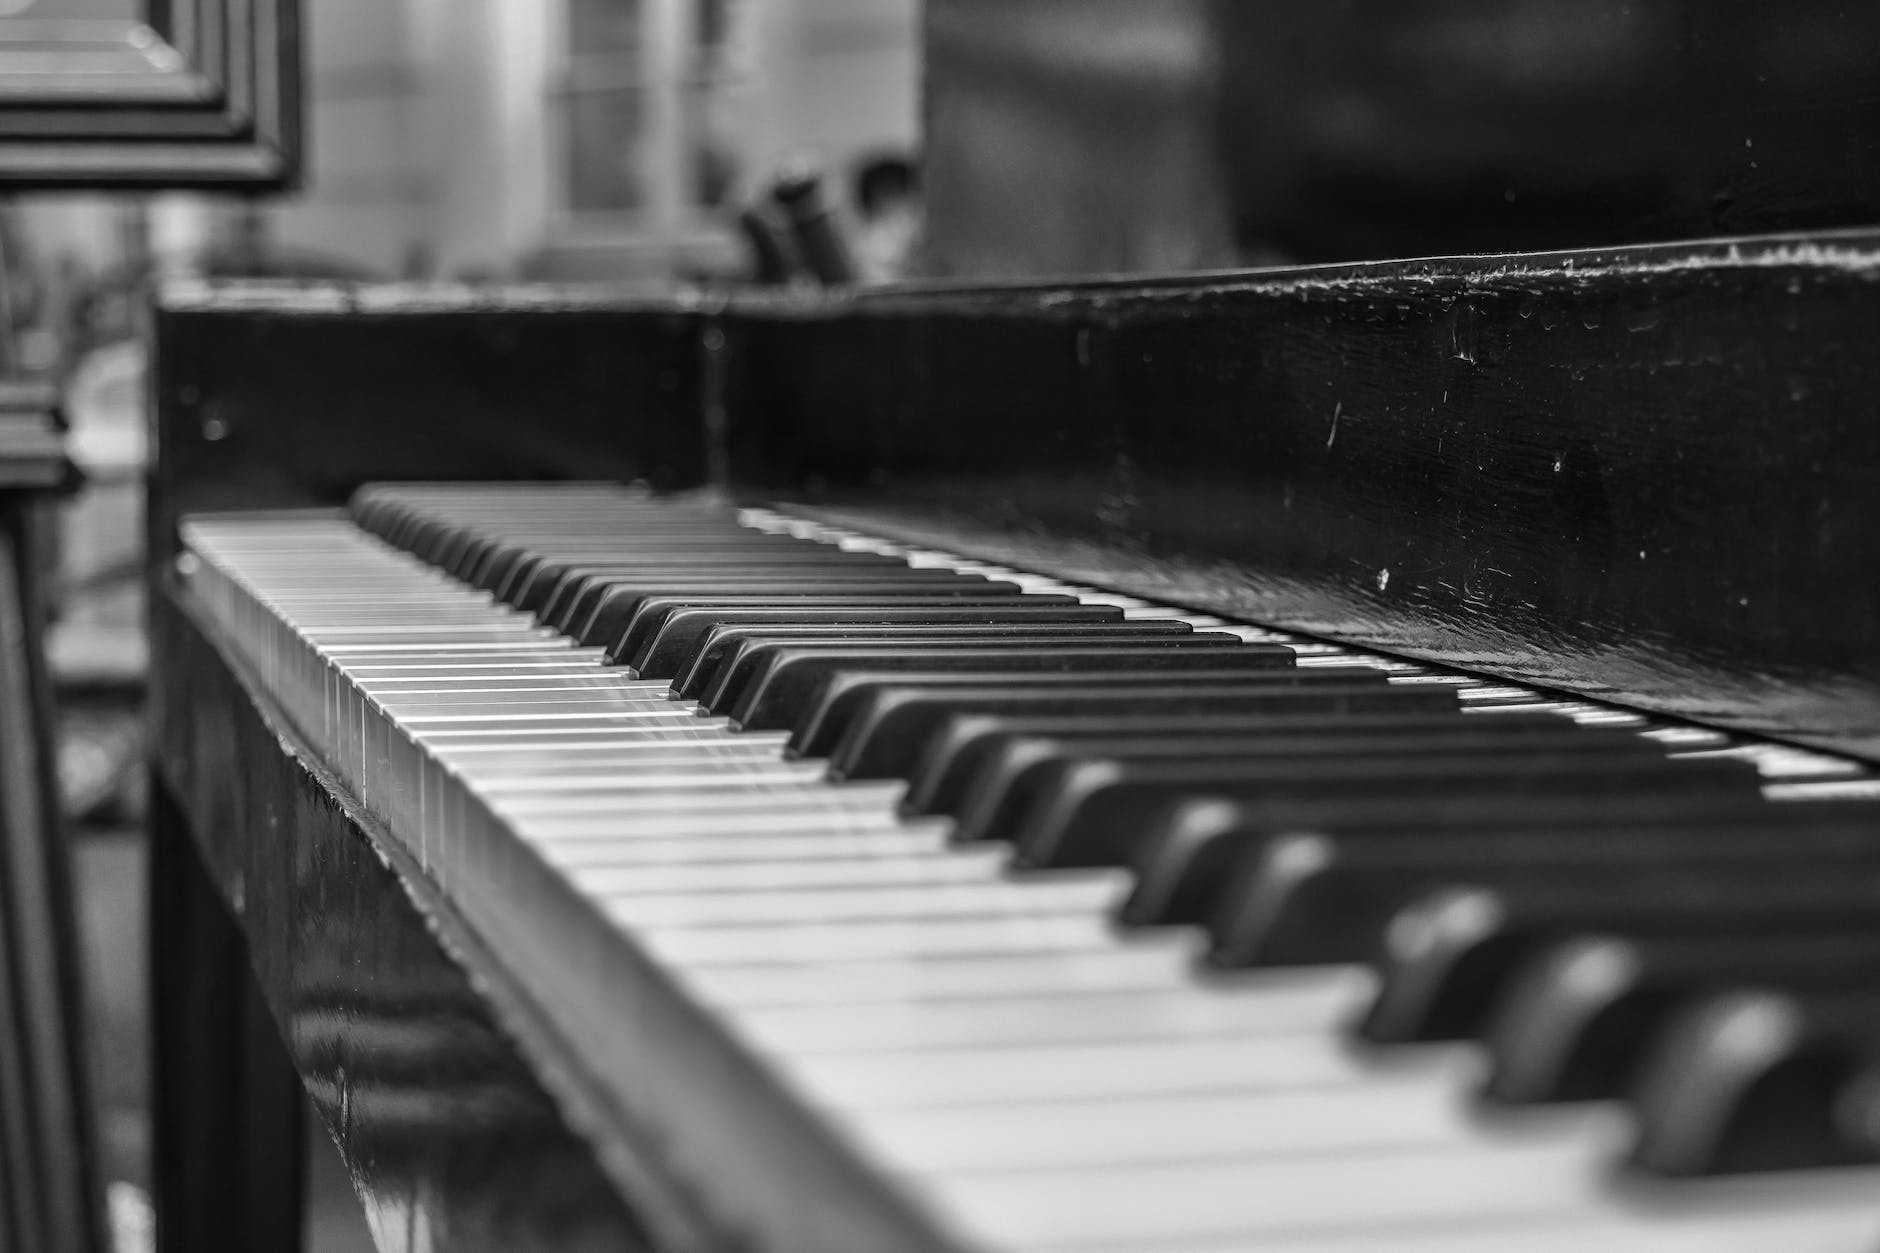 close up shot of upright piano grayscale photo. Equal temperament largely dealt with tuning and intonation.